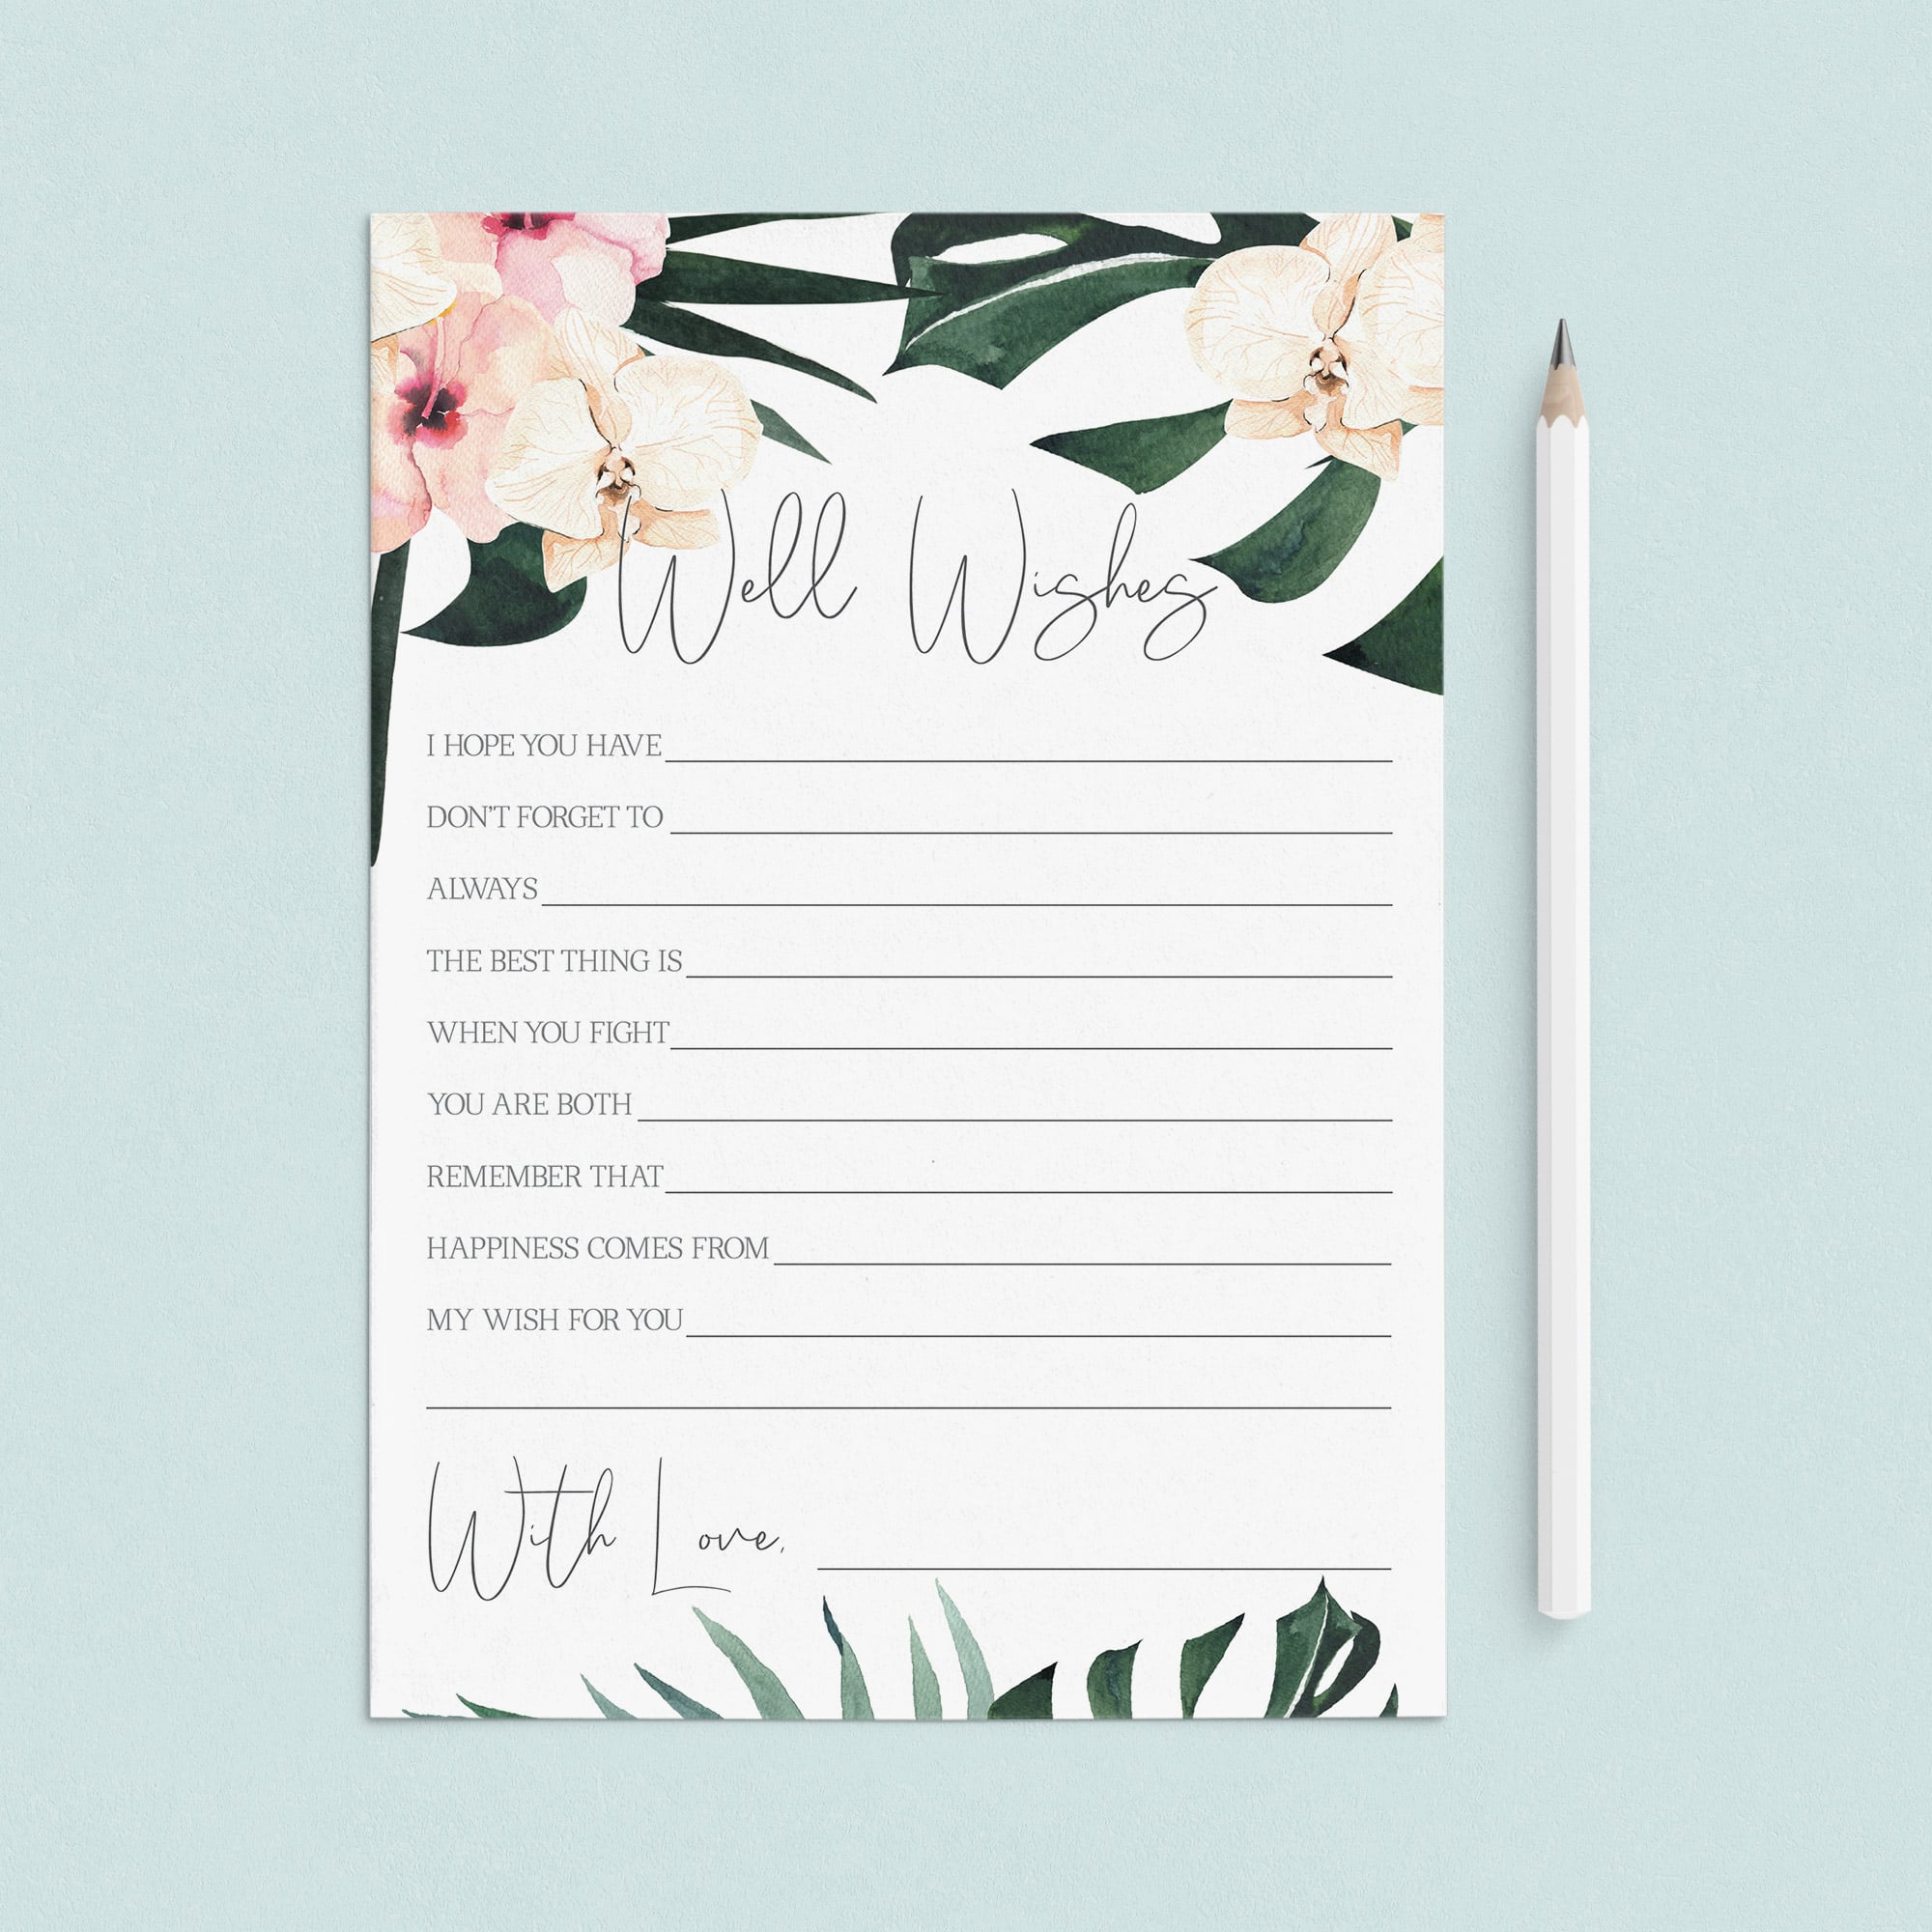 Summer Wedding Well Wishes Cards Instant Download by LittleSizzle